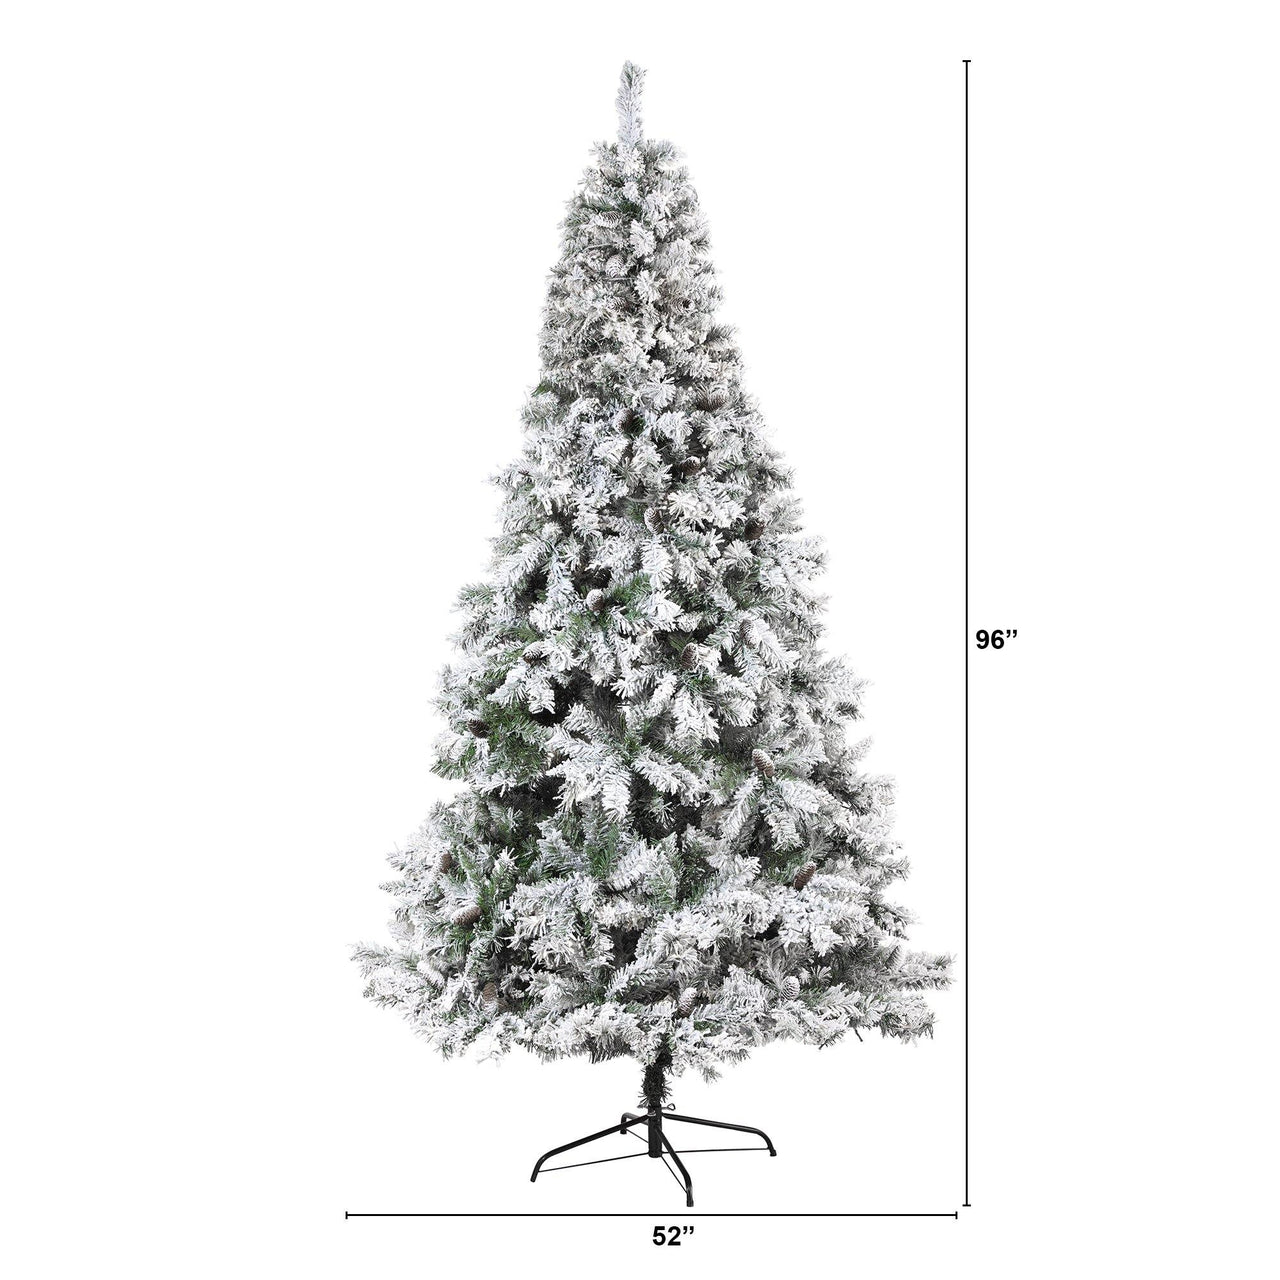 8' Flocked White River Mountain Pine Artificial Christmas Tree with Pinecones - The Fox Decor